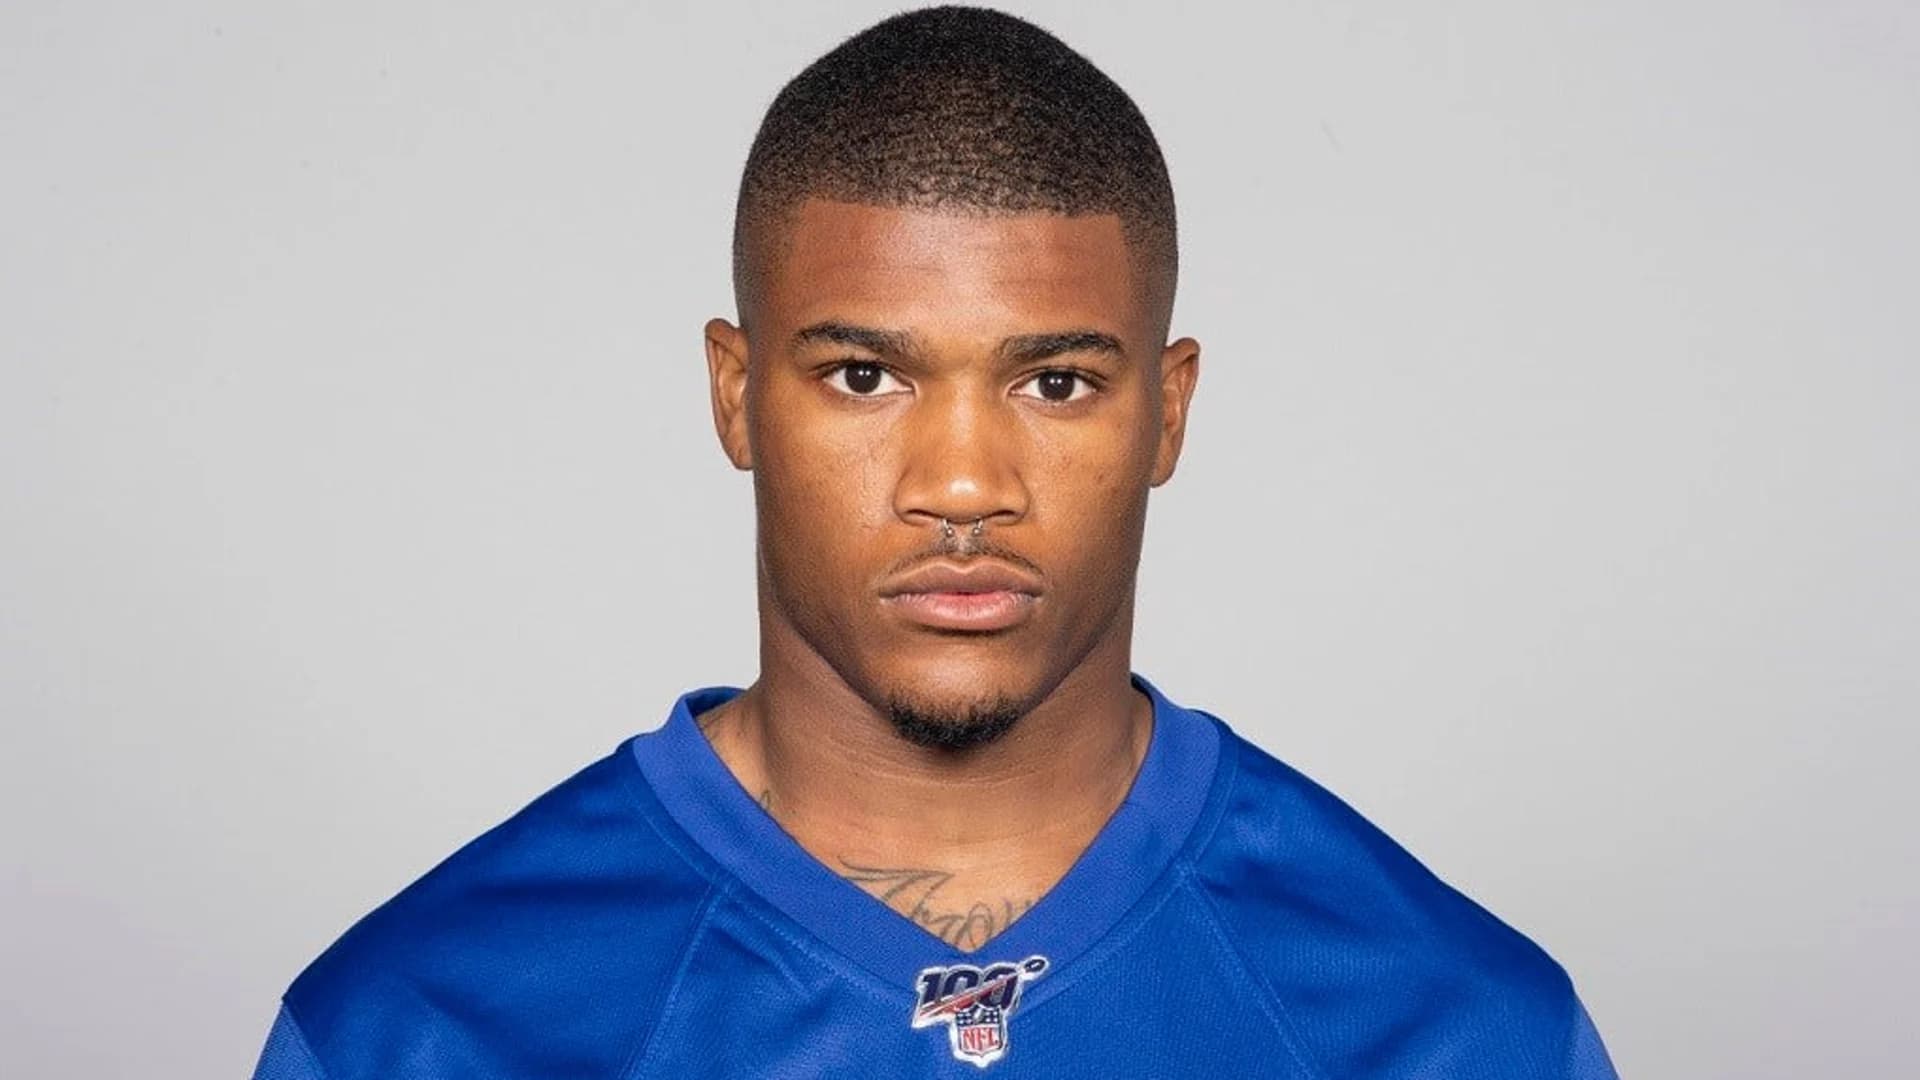 Giants player Kamrin Moore charged with aggravated assault